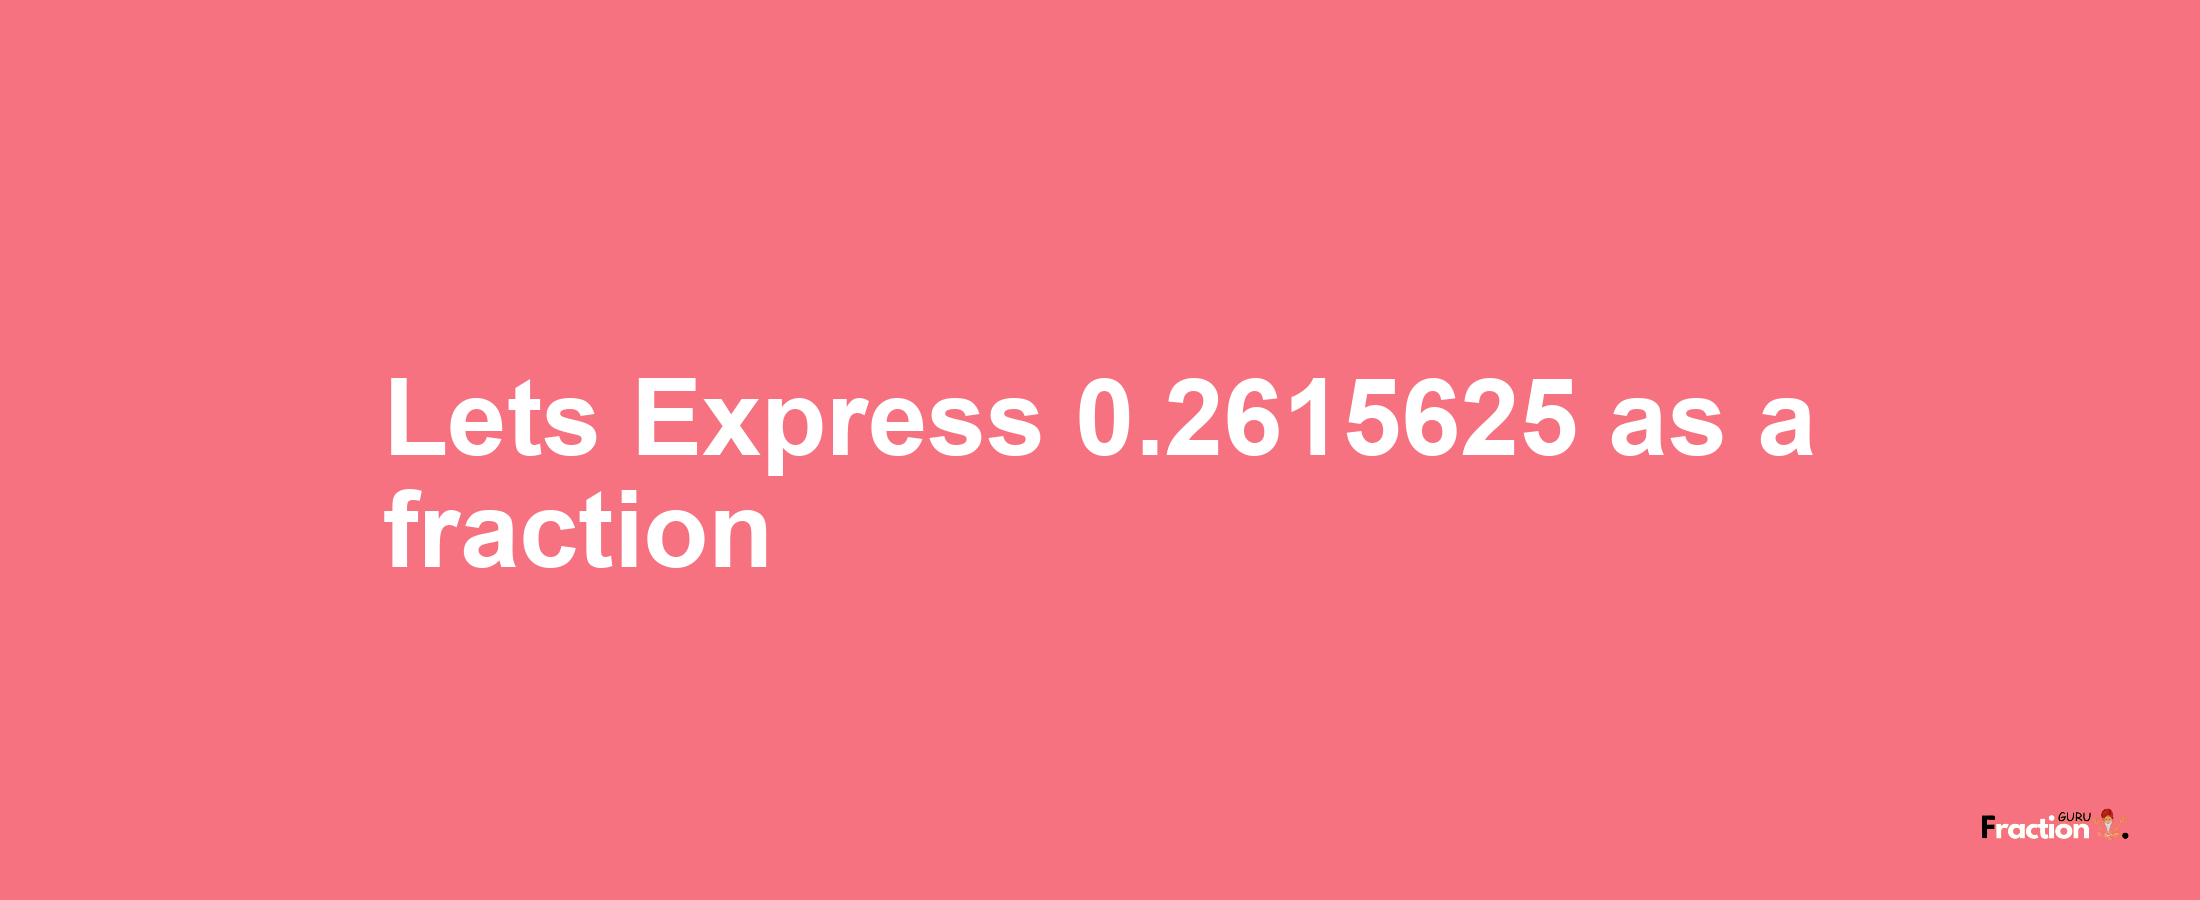 Lets Express 0.2615625 as afraction